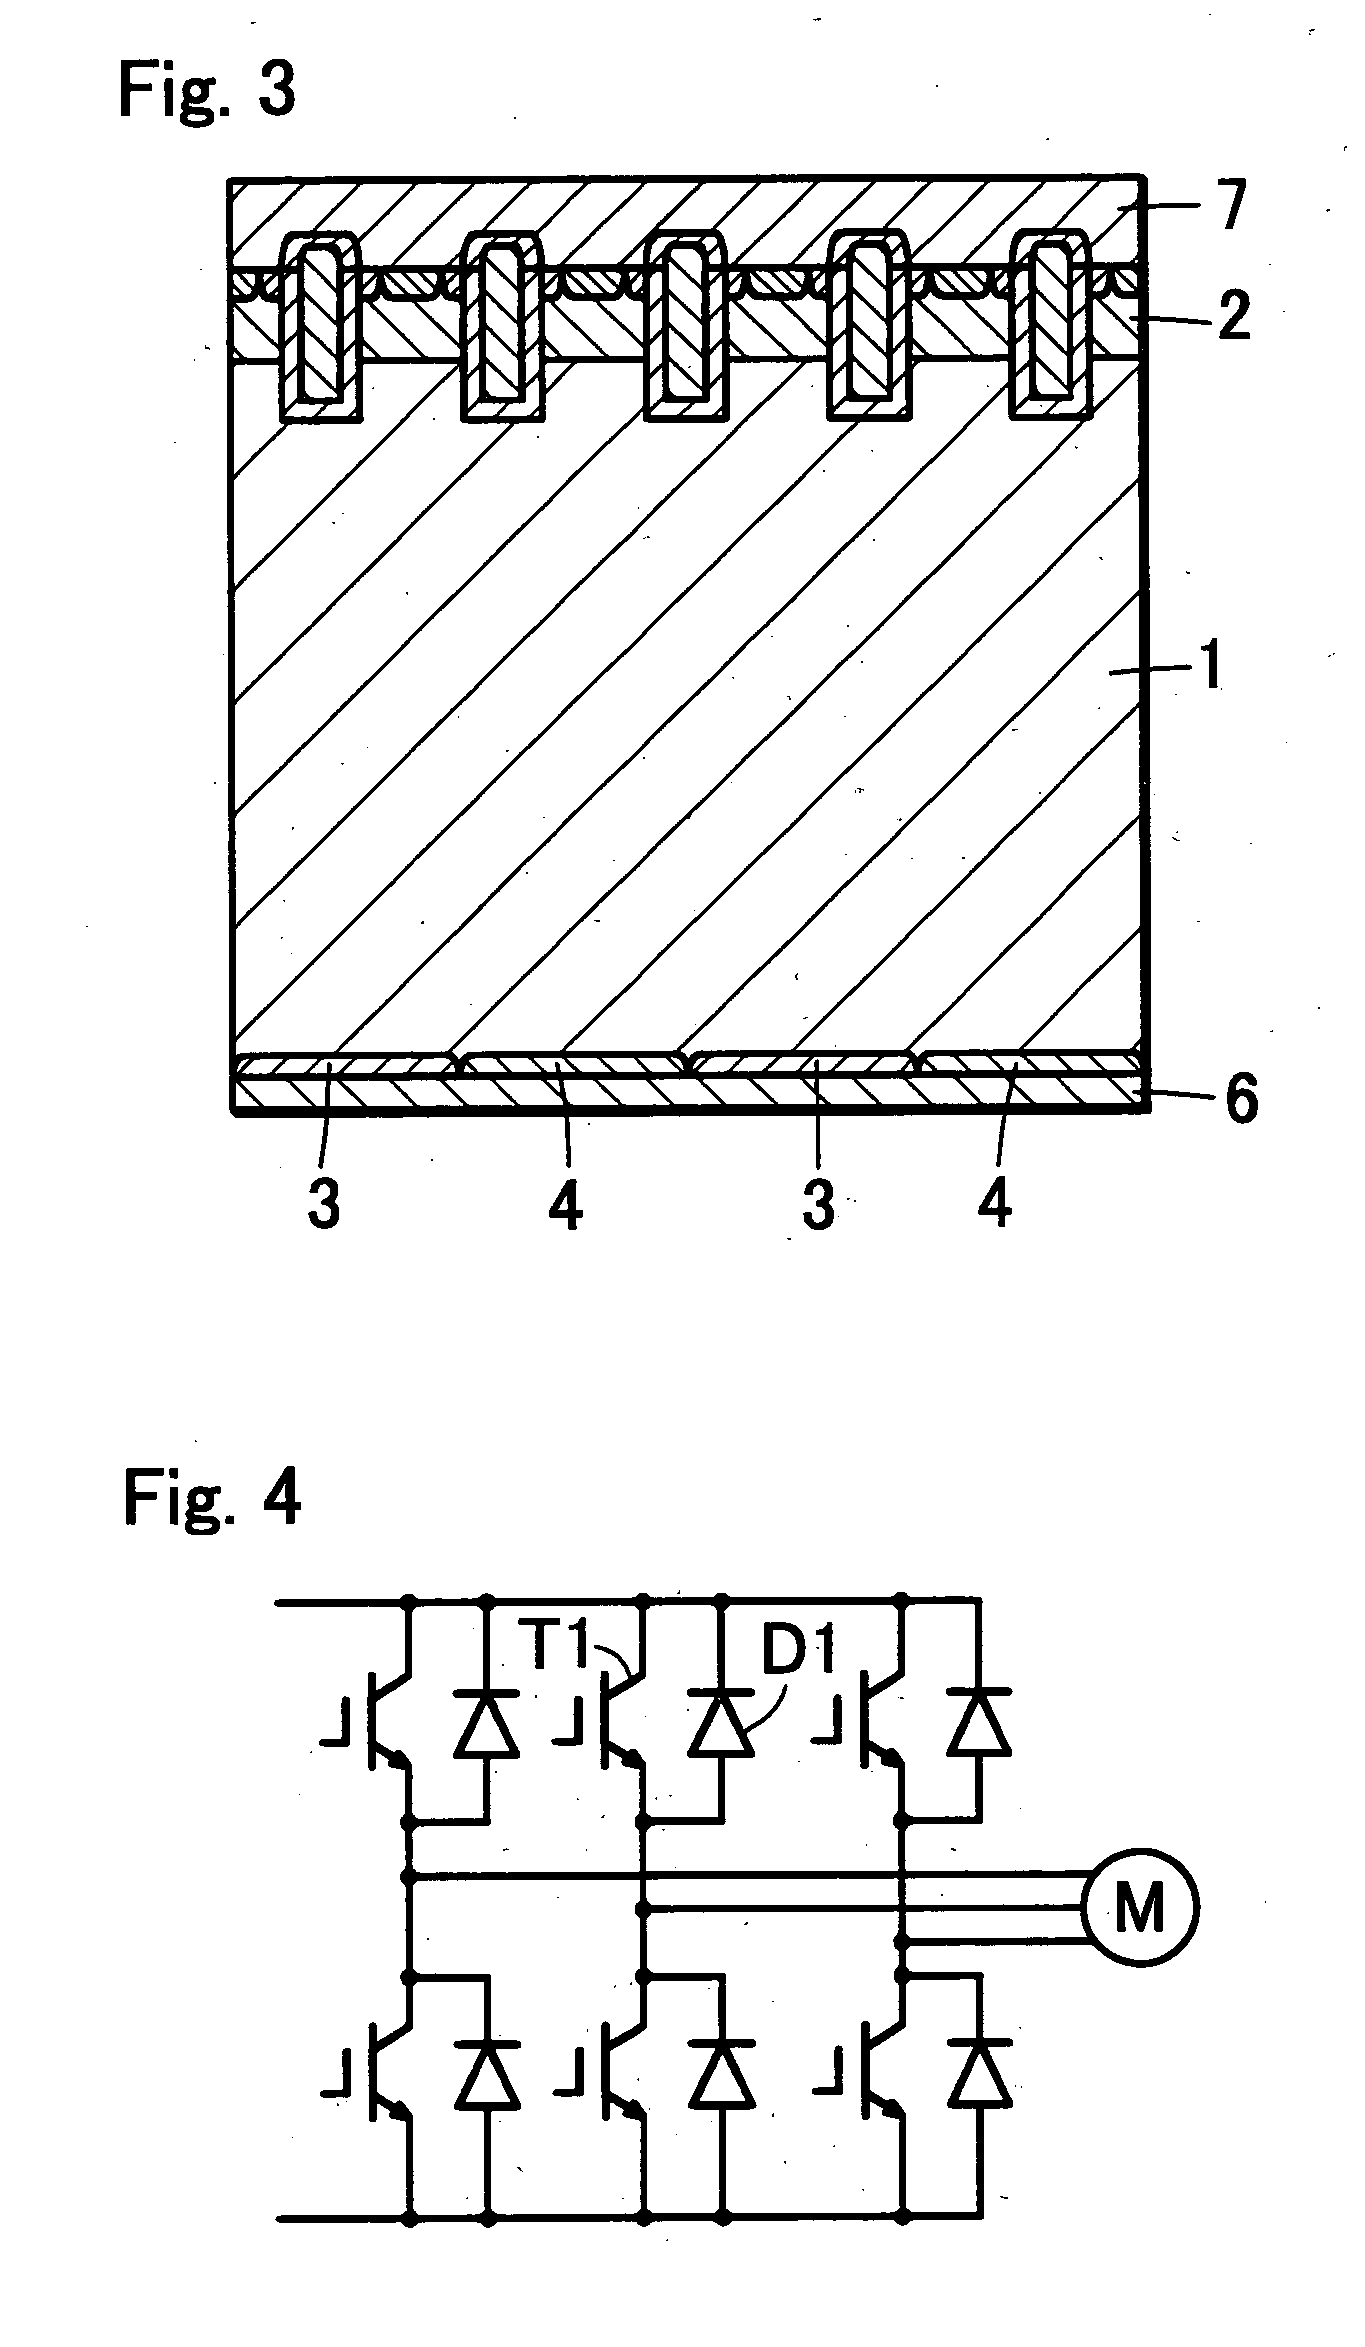 Reverse conducting semiconductor device and a fabrication method thereof